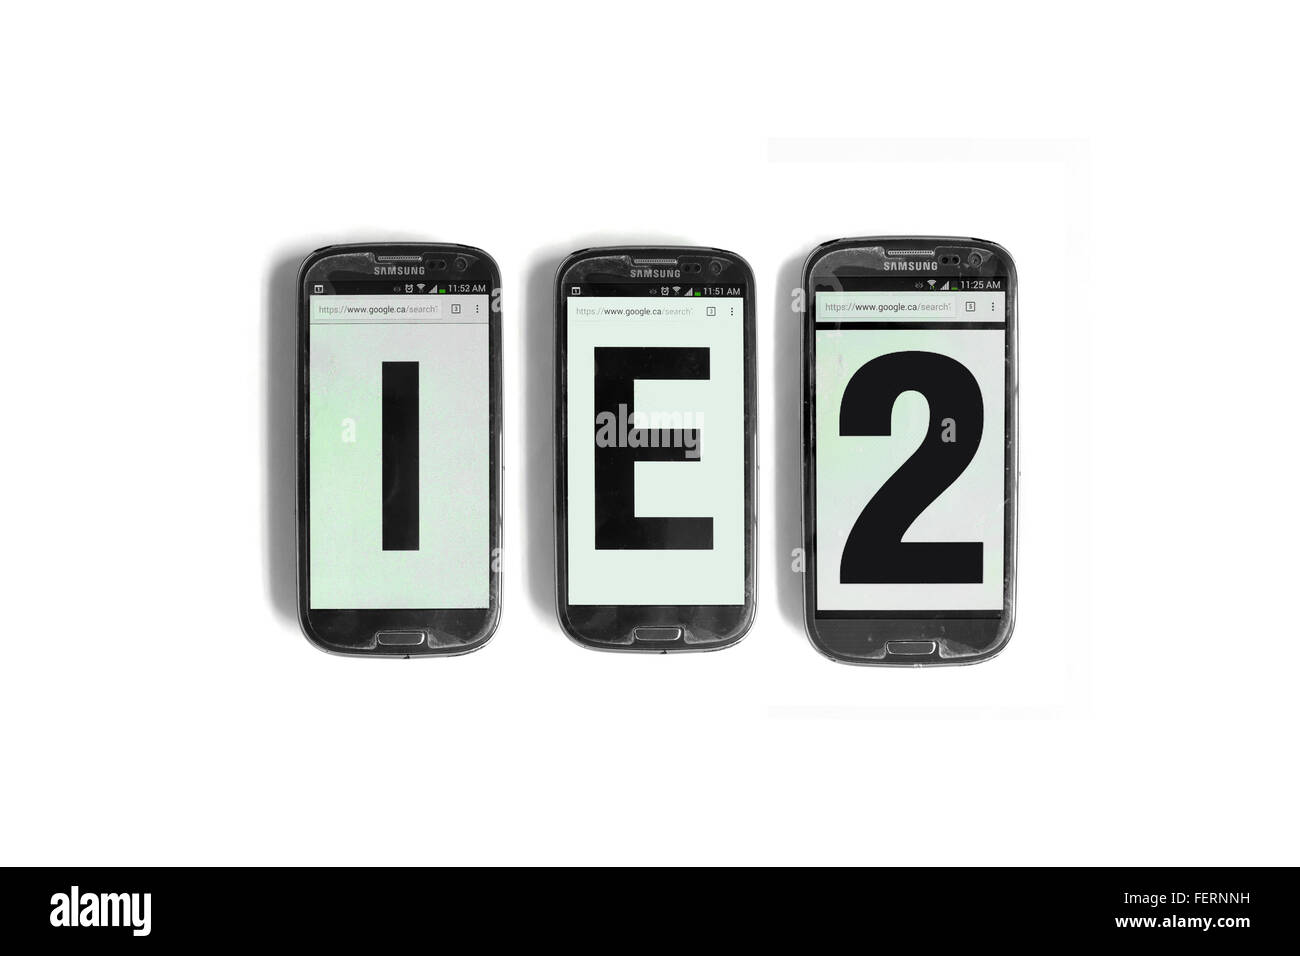 IE2 on the screens of smartphones photographed against a  white background. Stock Photo